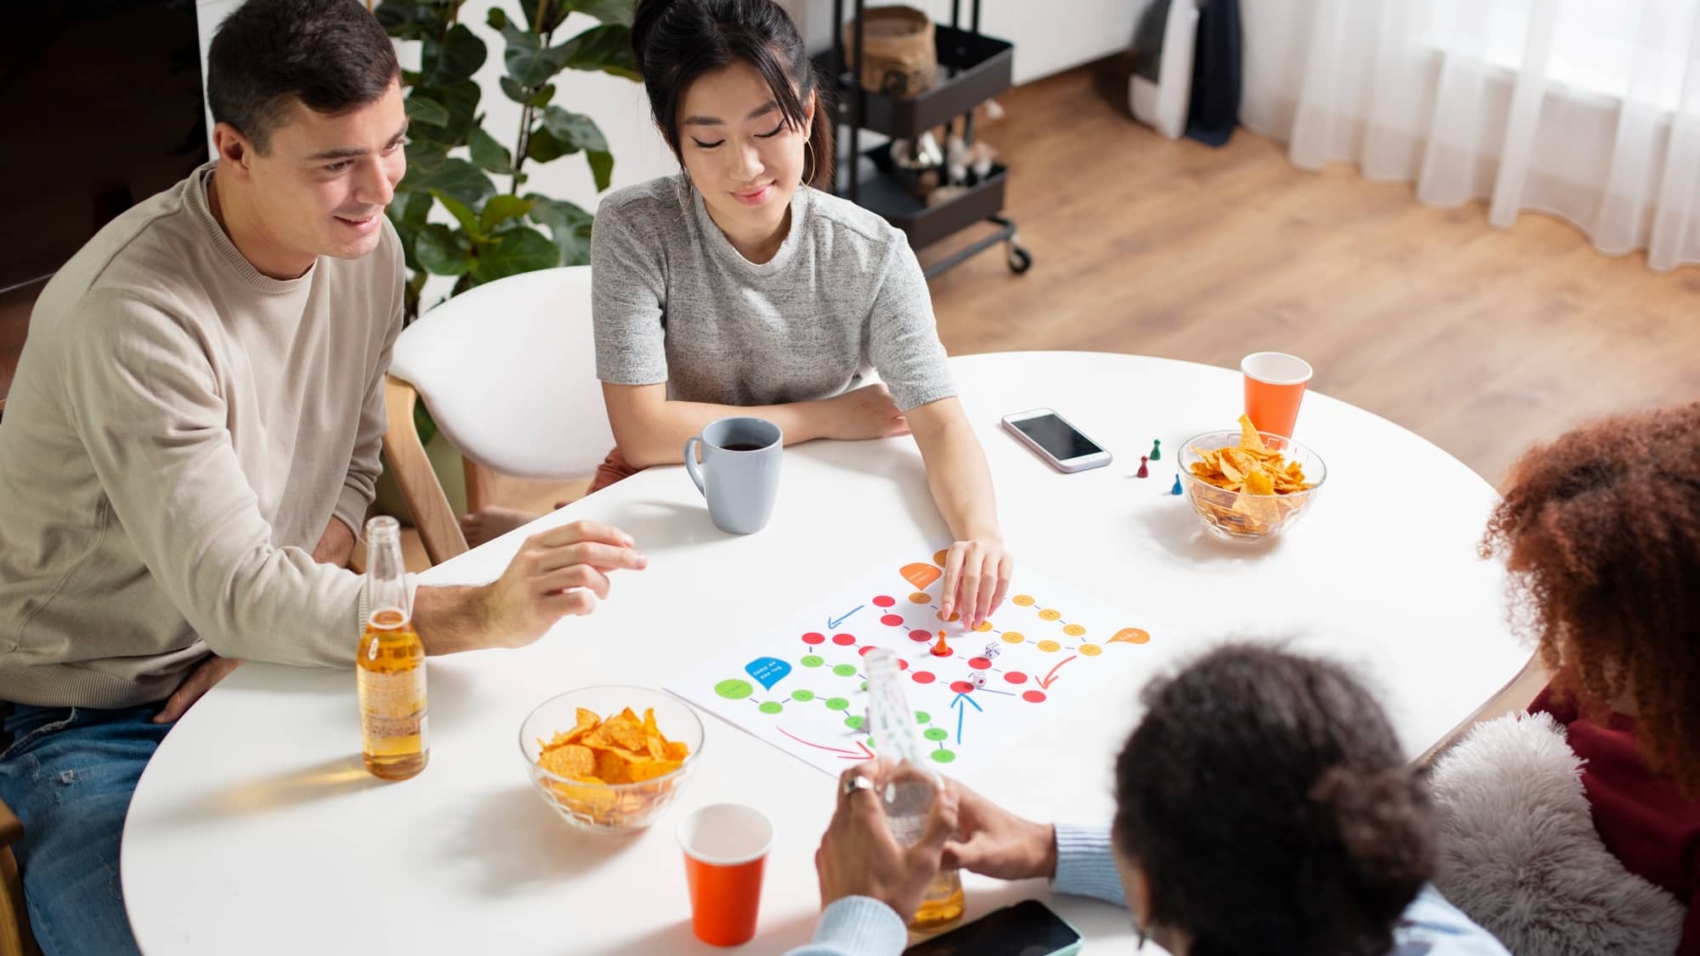 Top 10 Game Night Ideas: Fun and Creative Board Games to Play with Friends and Family